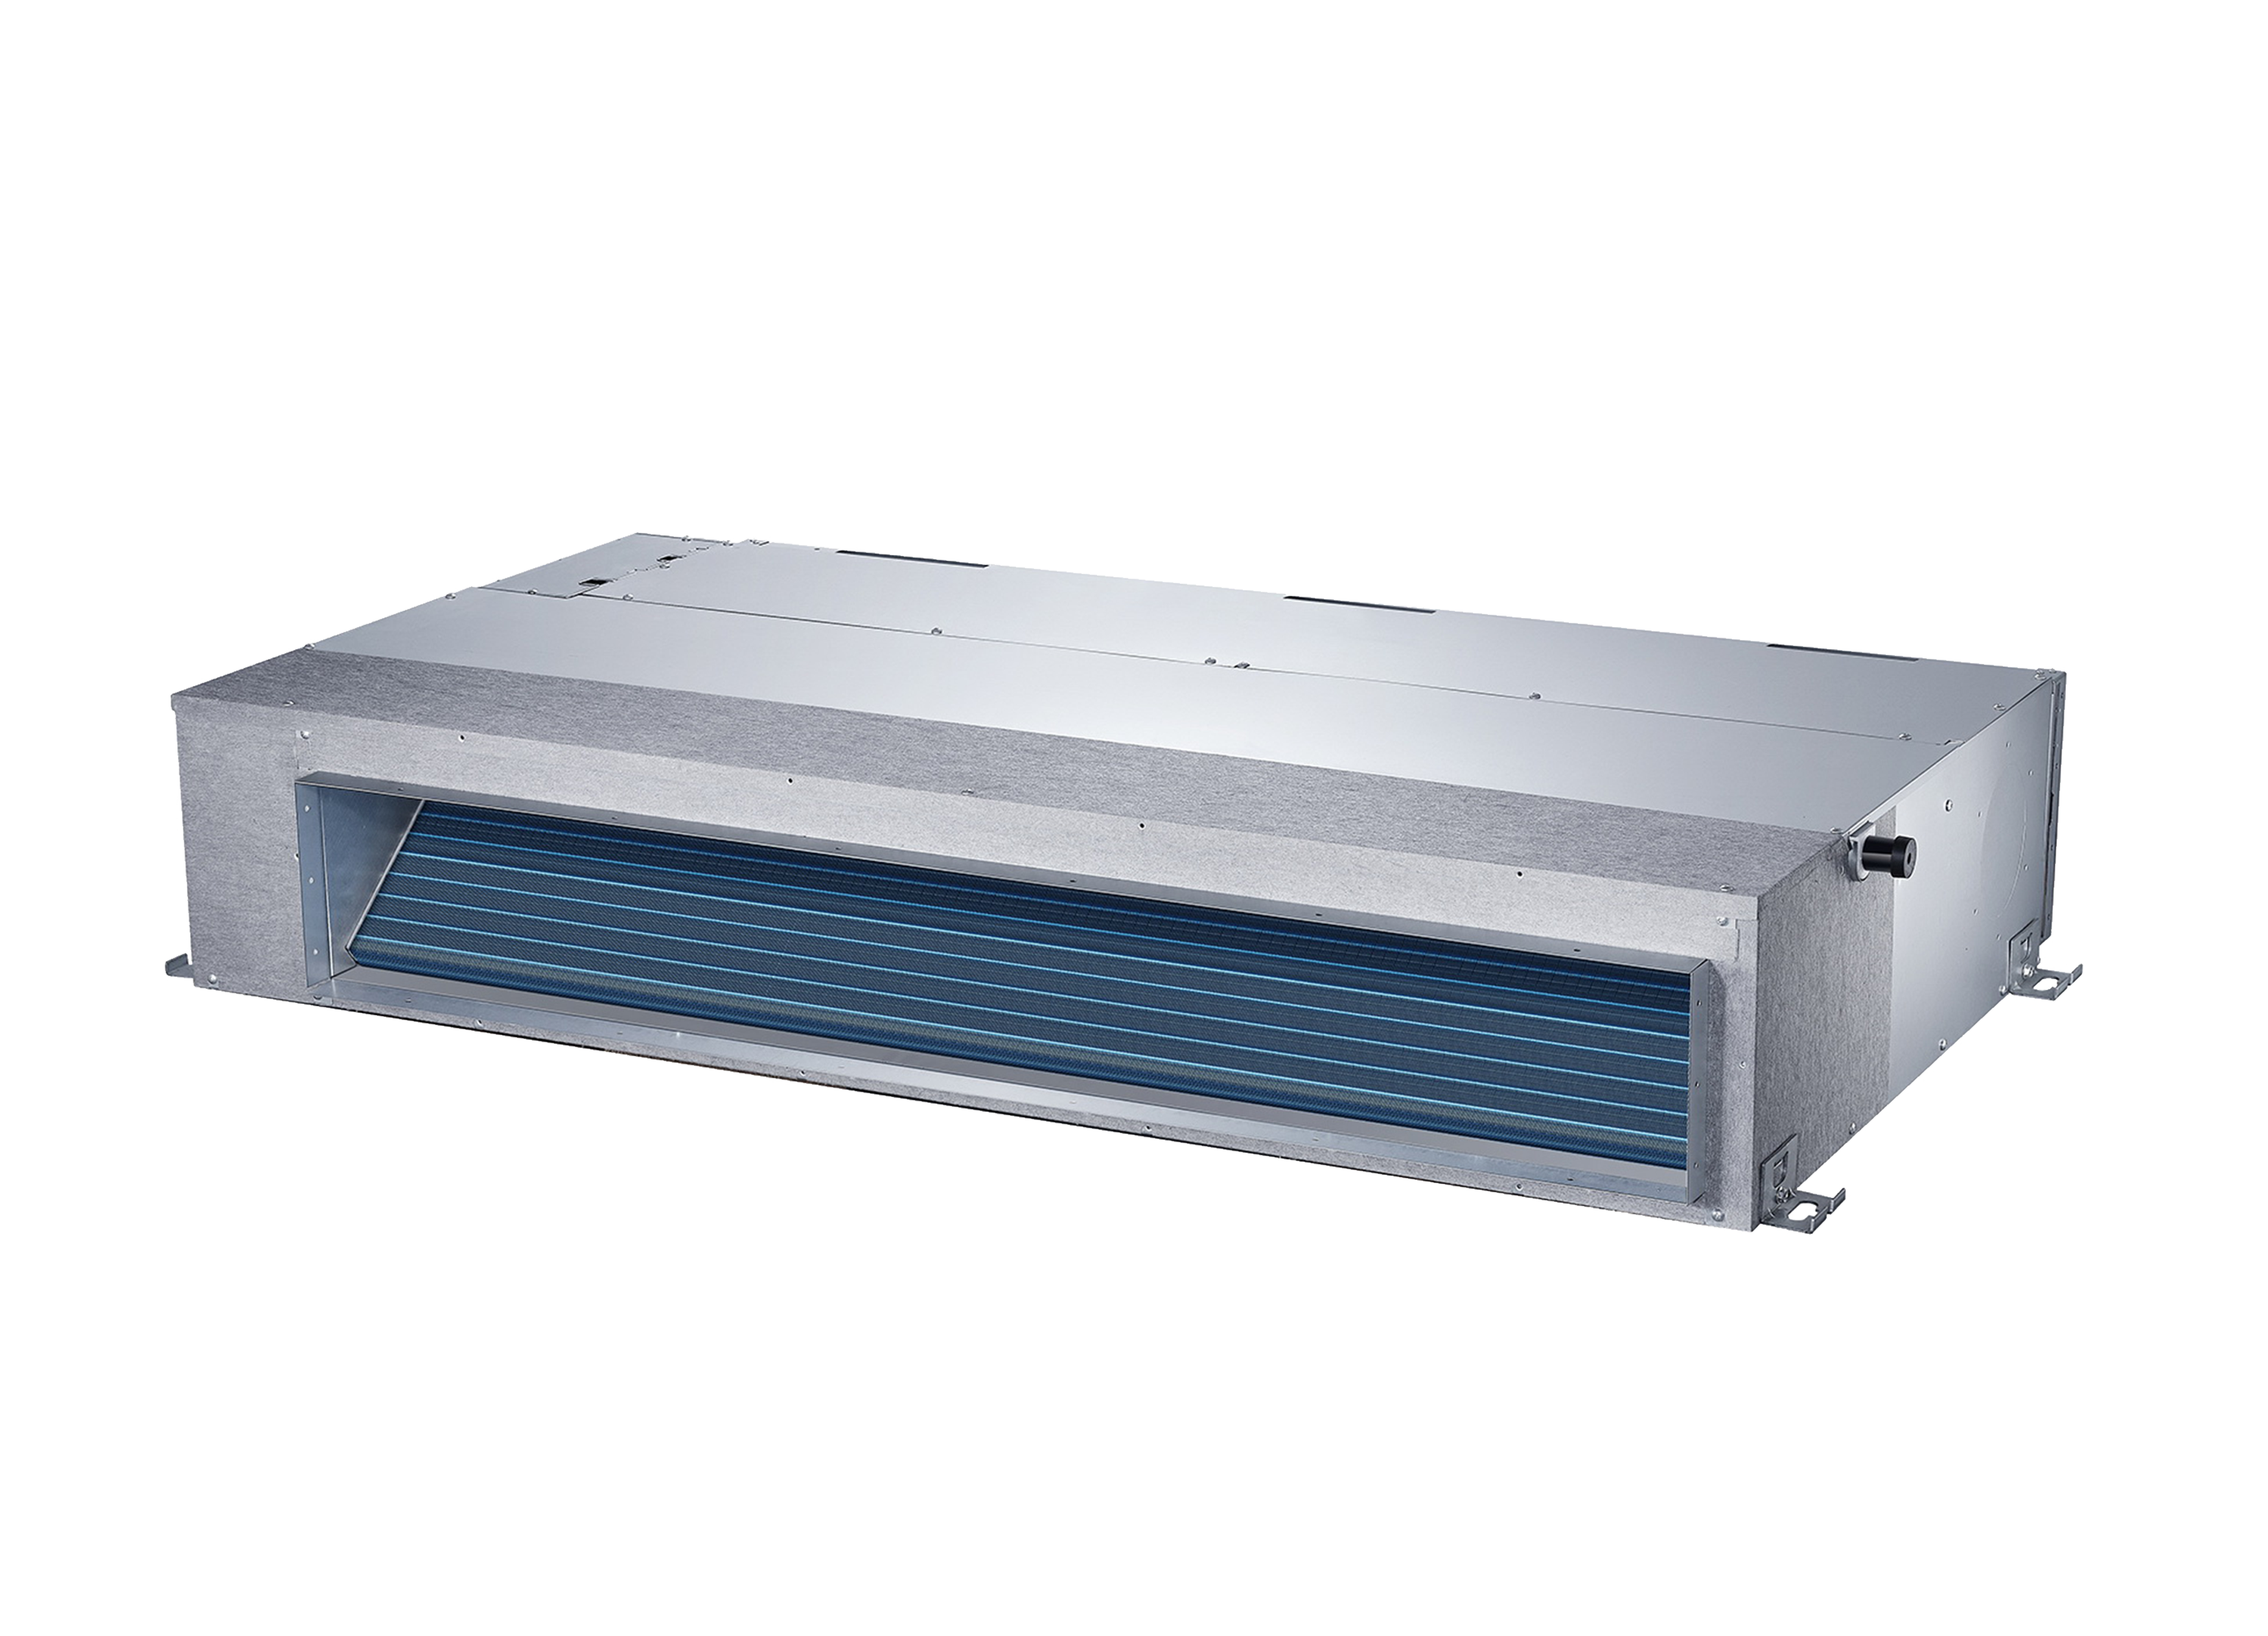 SYSPLIT DUCT - Split Systems - Air Conditioners - Products - Systemair